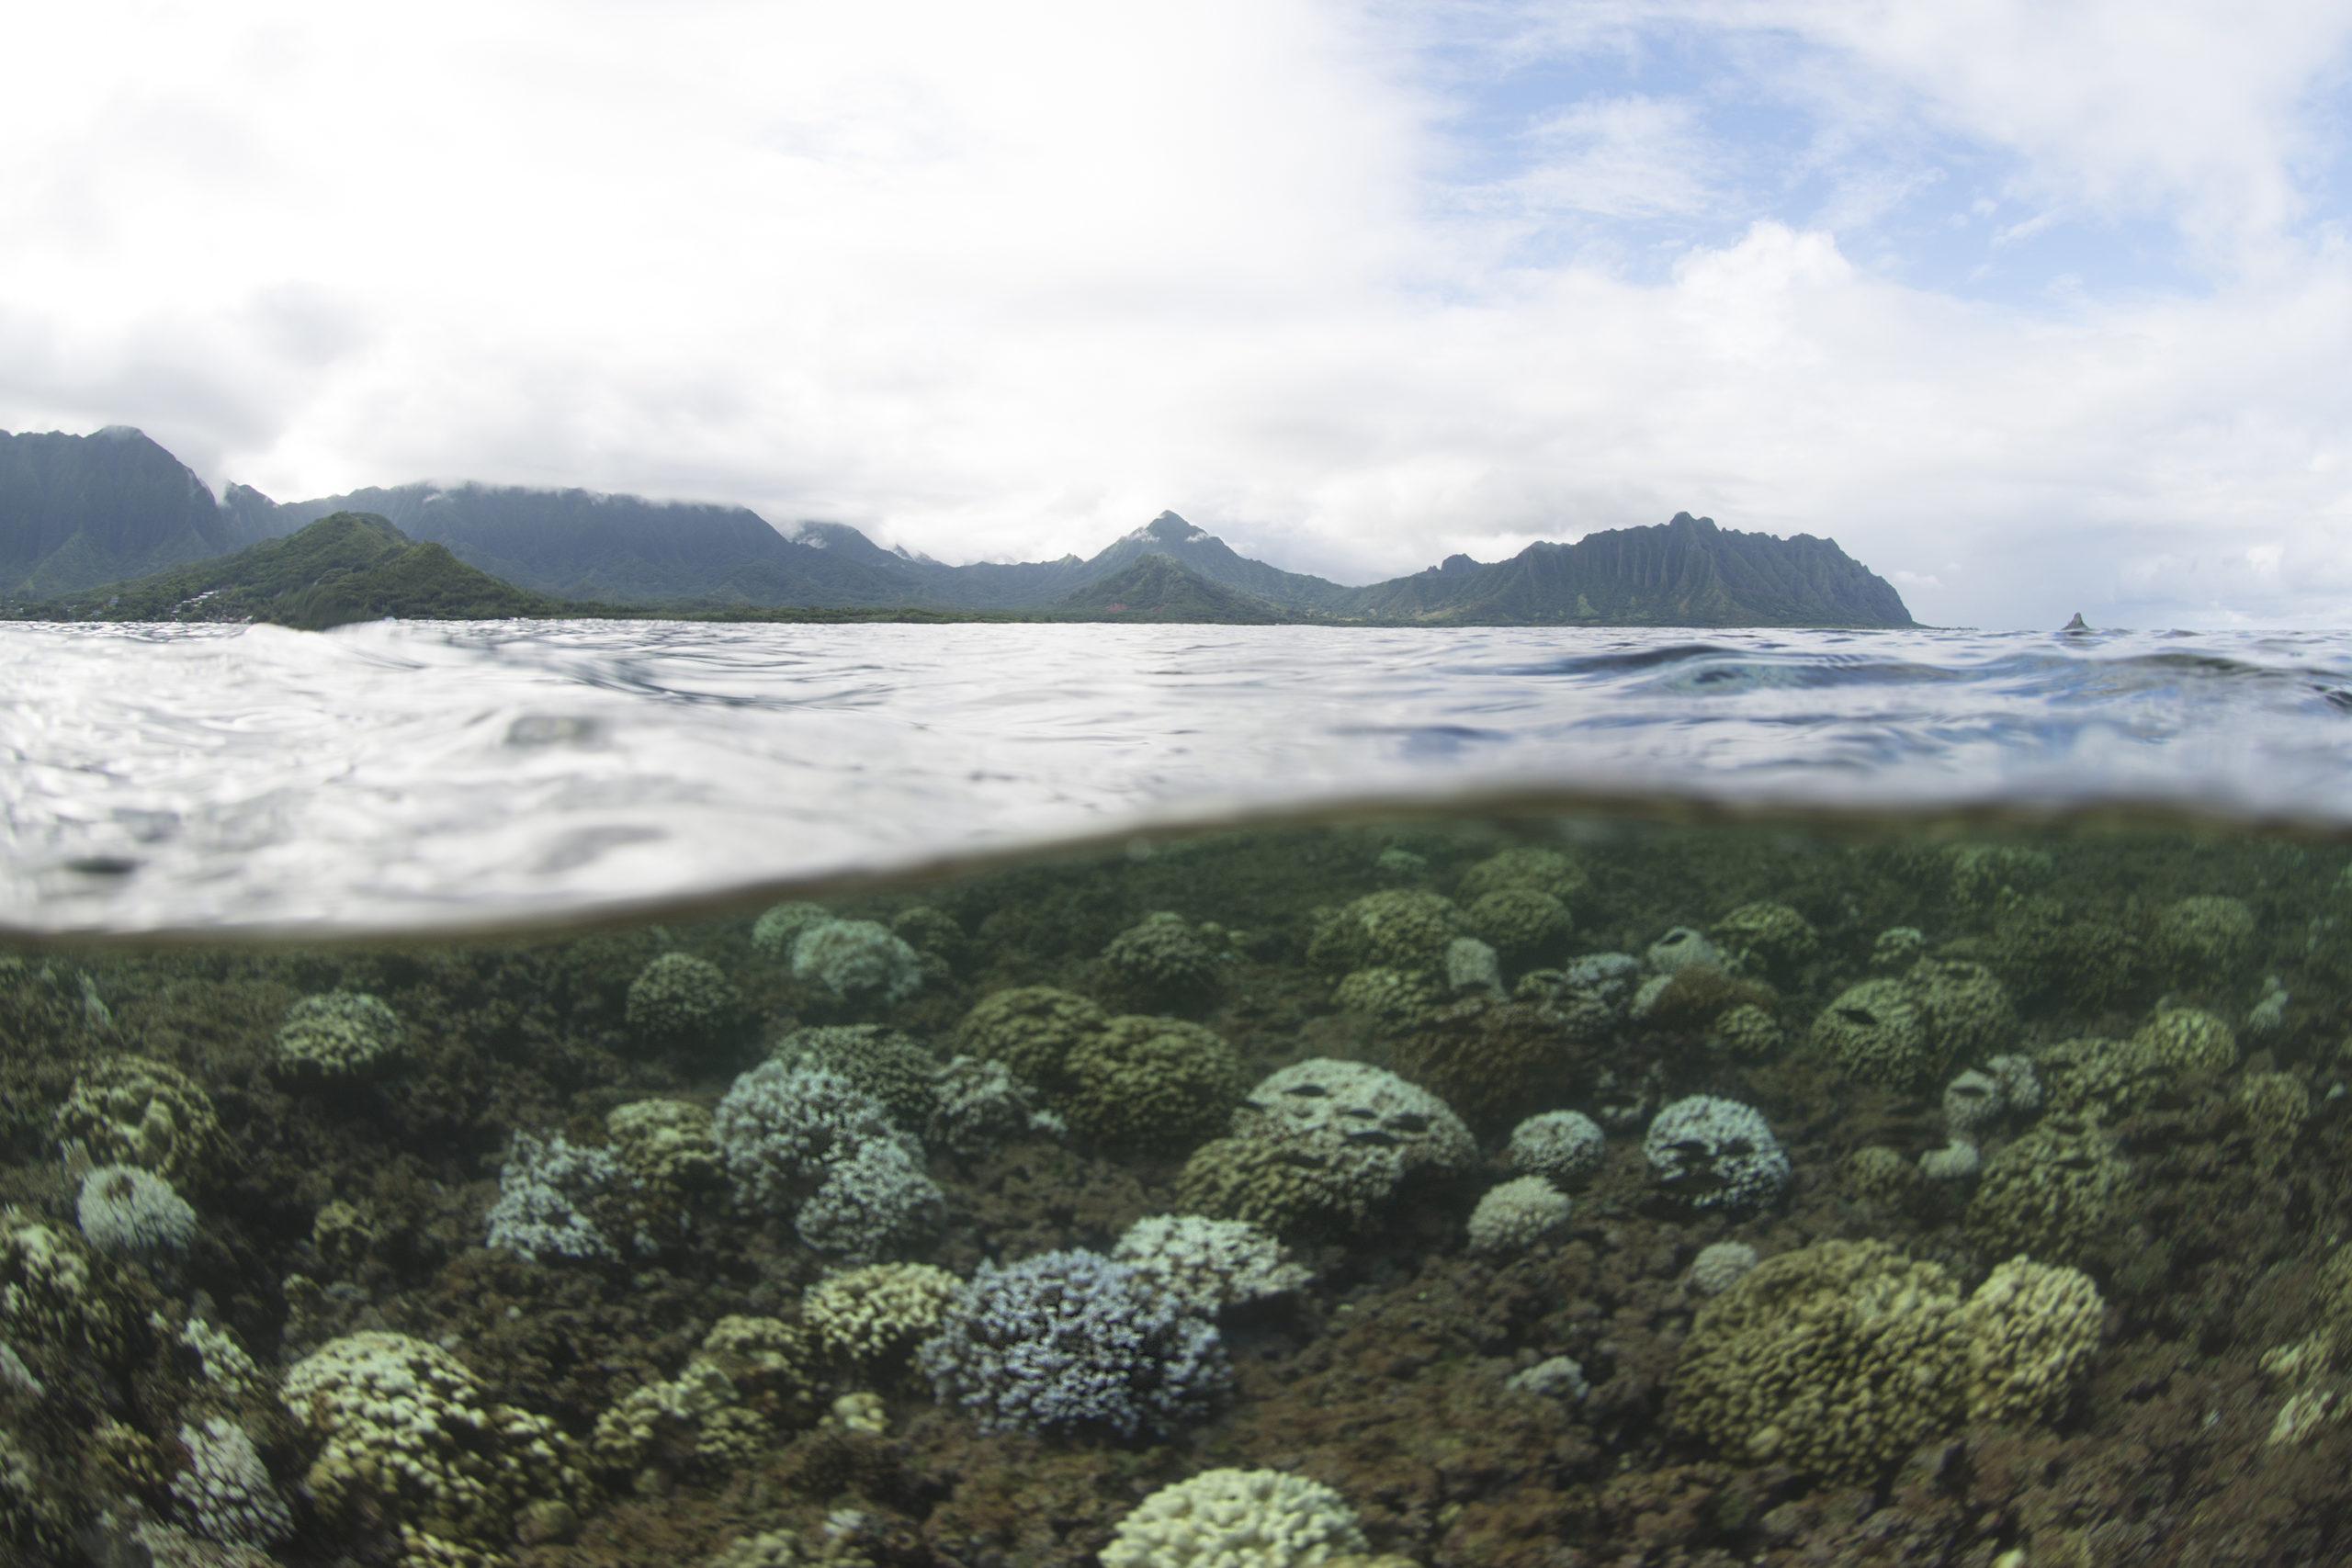 This Is What A Mass Die-Off Of Earth’s Coral Reefs Looks Like